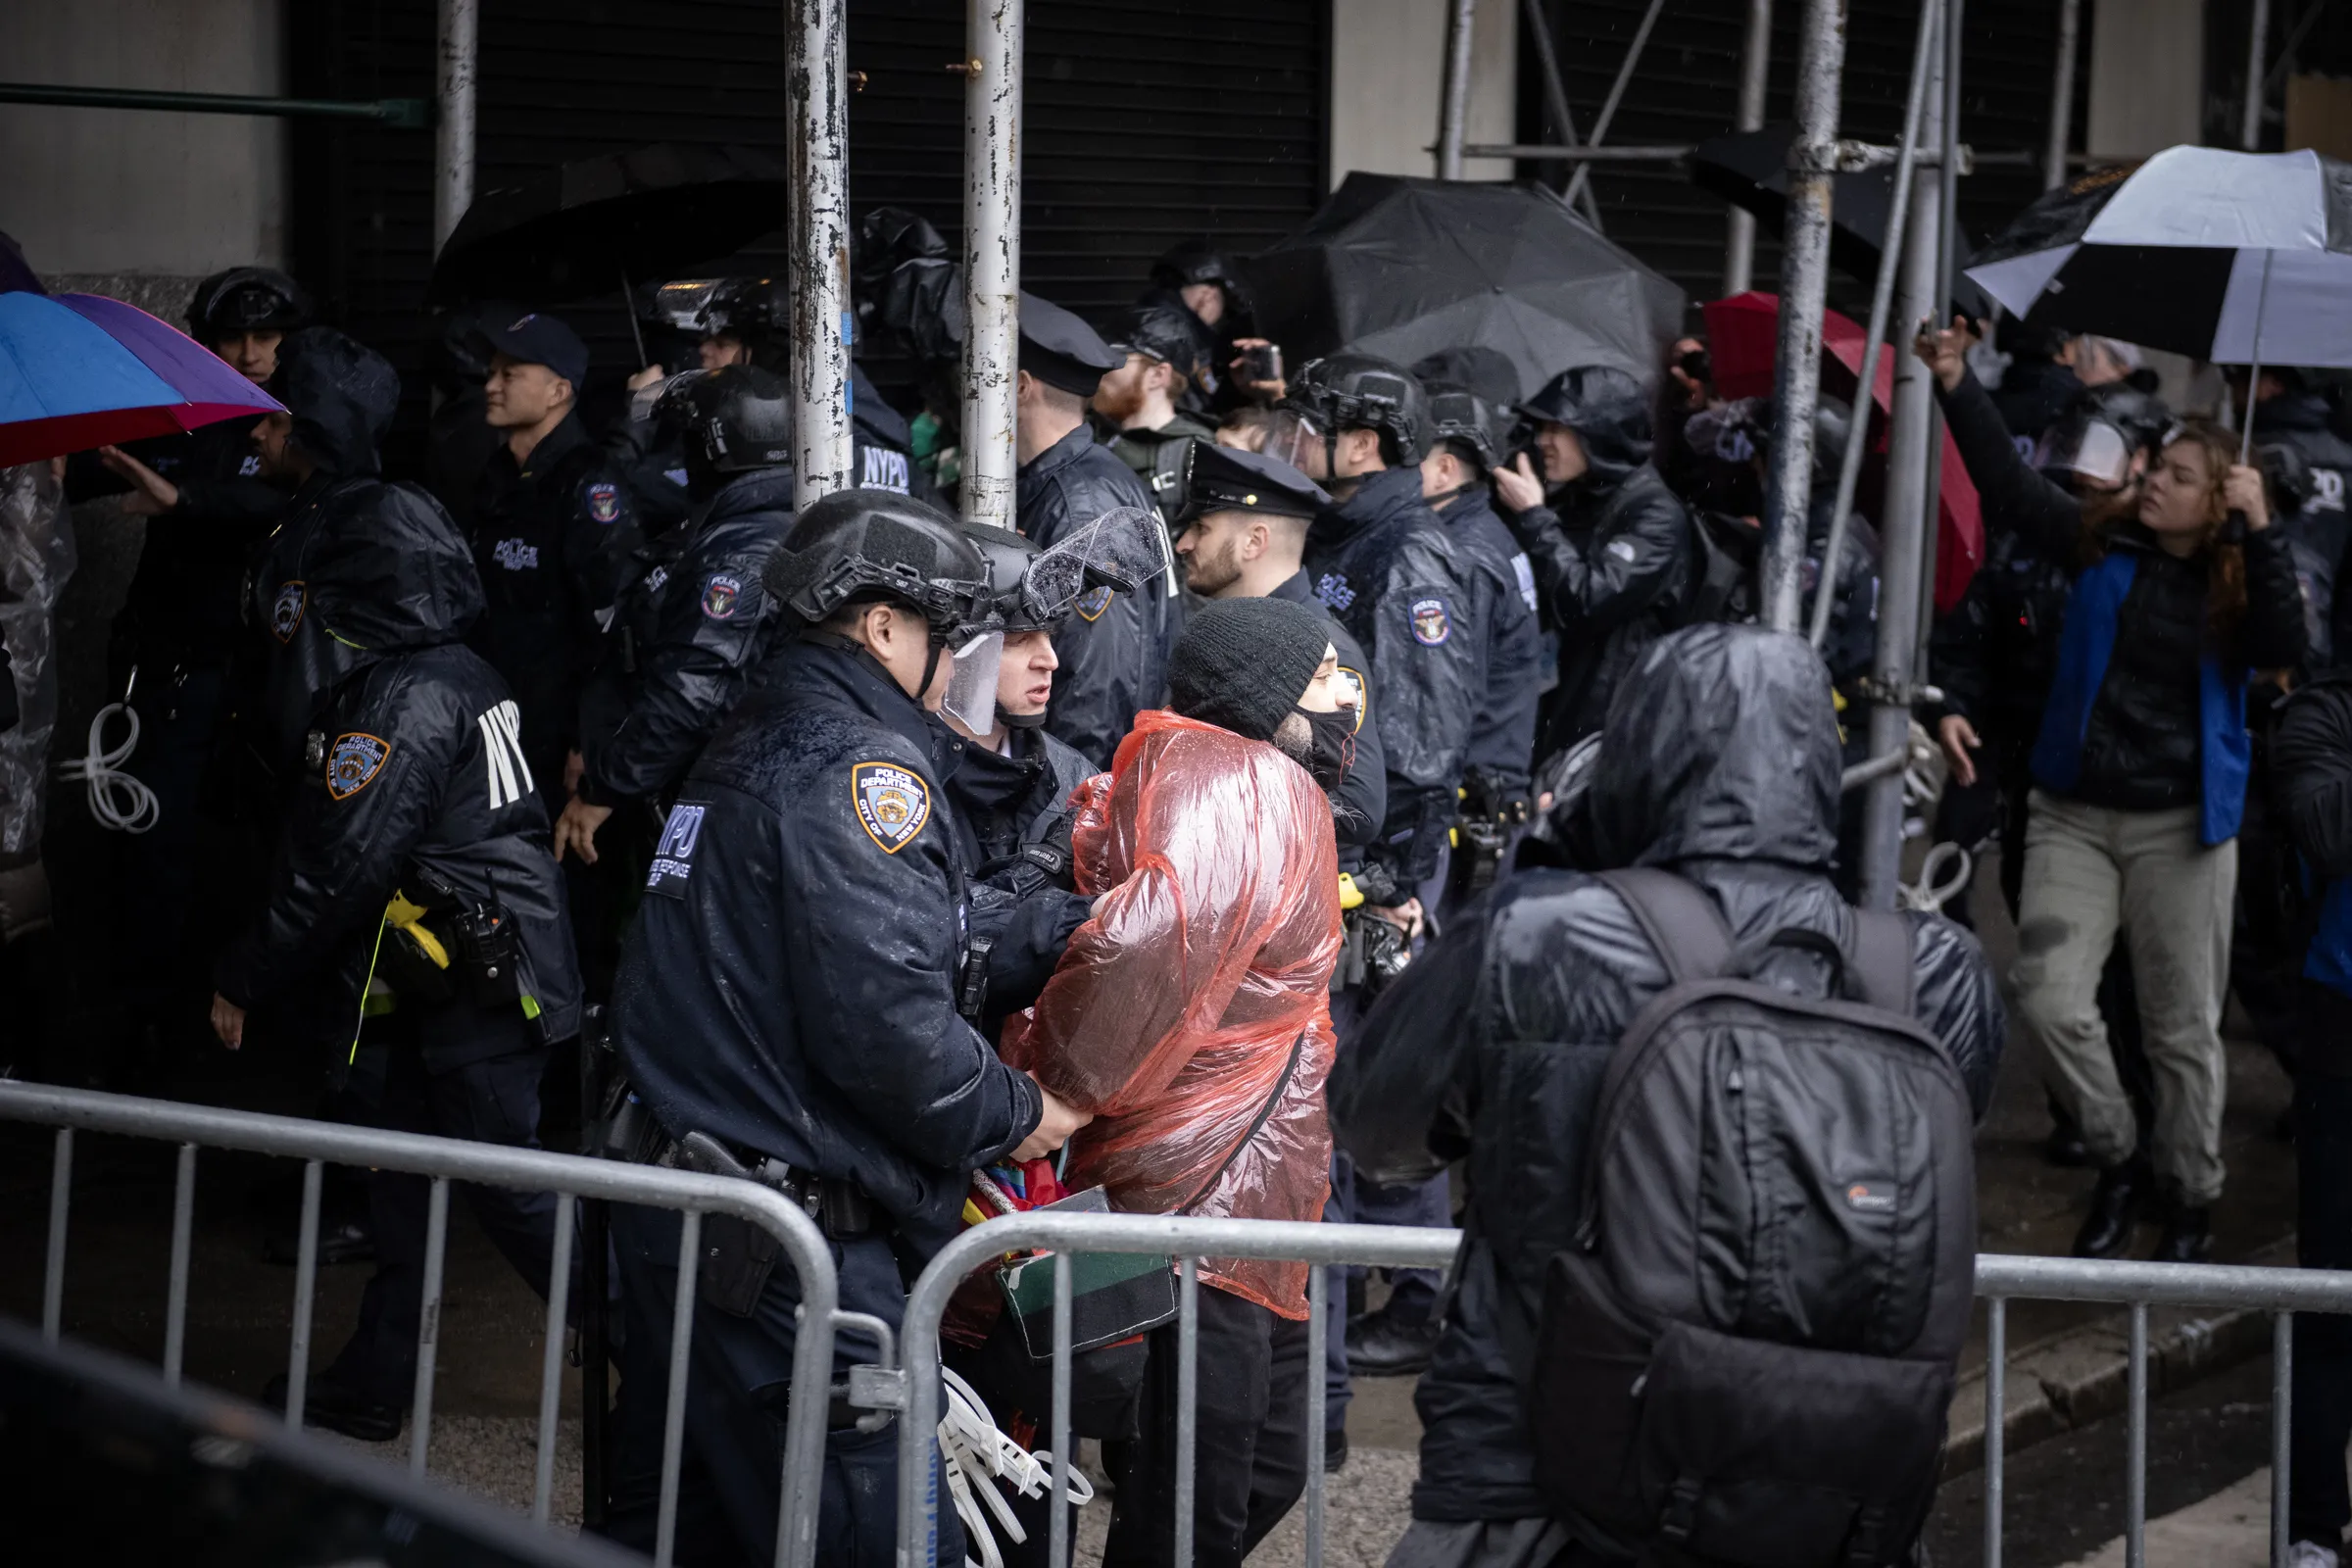 New York City police had to make several arrests of pro-abortion protestors during the event because of attempts to disrupt the International Gift of Life Walk in lower Manhattan on March 23, 2024. Credit: Jeffrey Bruno